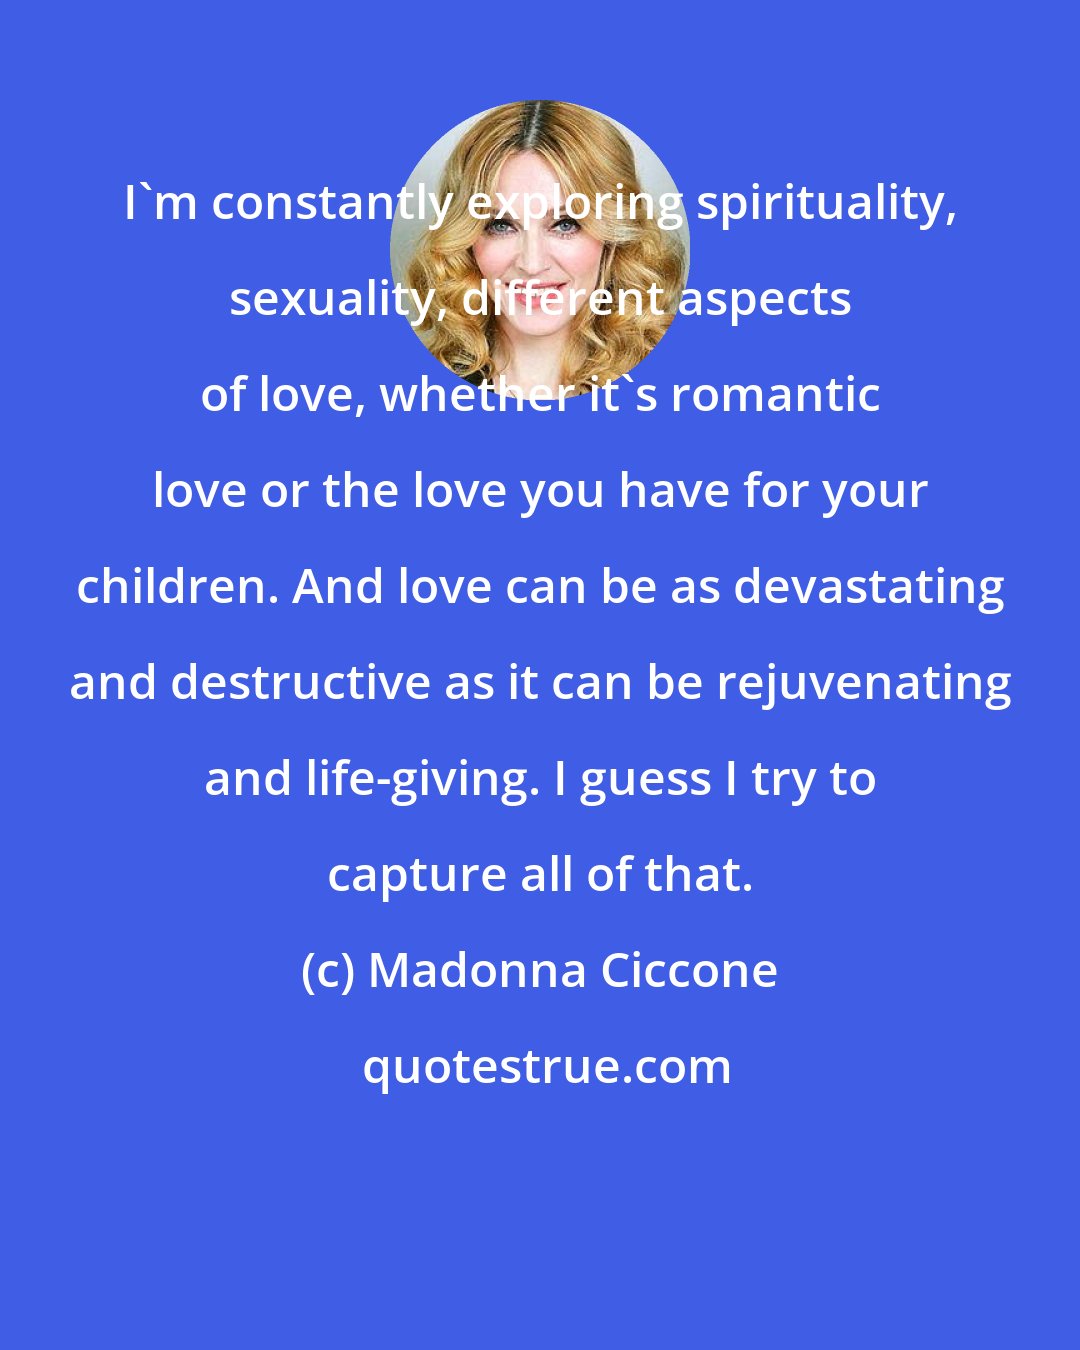 Madonna Ciccone: I'm constantly exploring spirituality, sexuality, different aspects of love, whether it's romantic love or the love you have for your children. And love can be as devastating and destructive as it can be rejuvenating and life-giving. I guess I try to capture all of that.